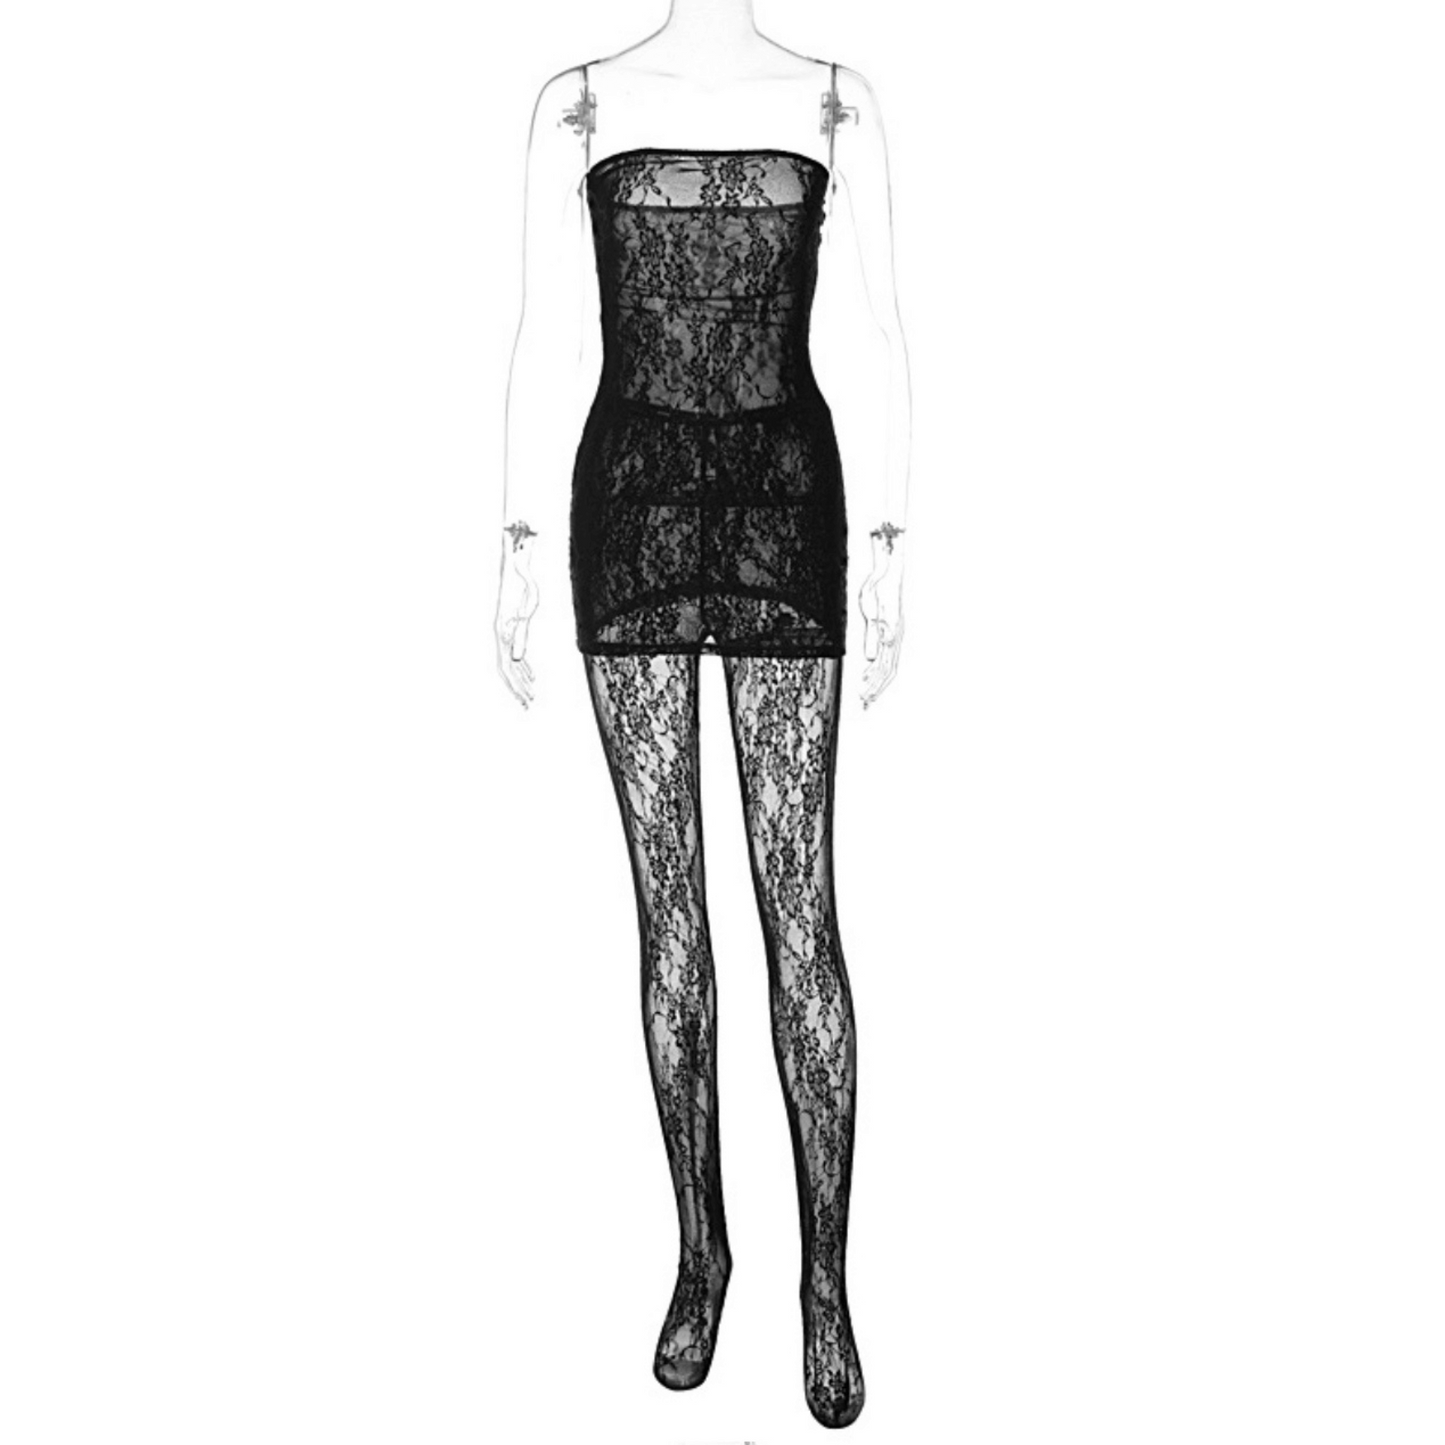 Miami Nights Lace Tube Dress and Lace Leggings